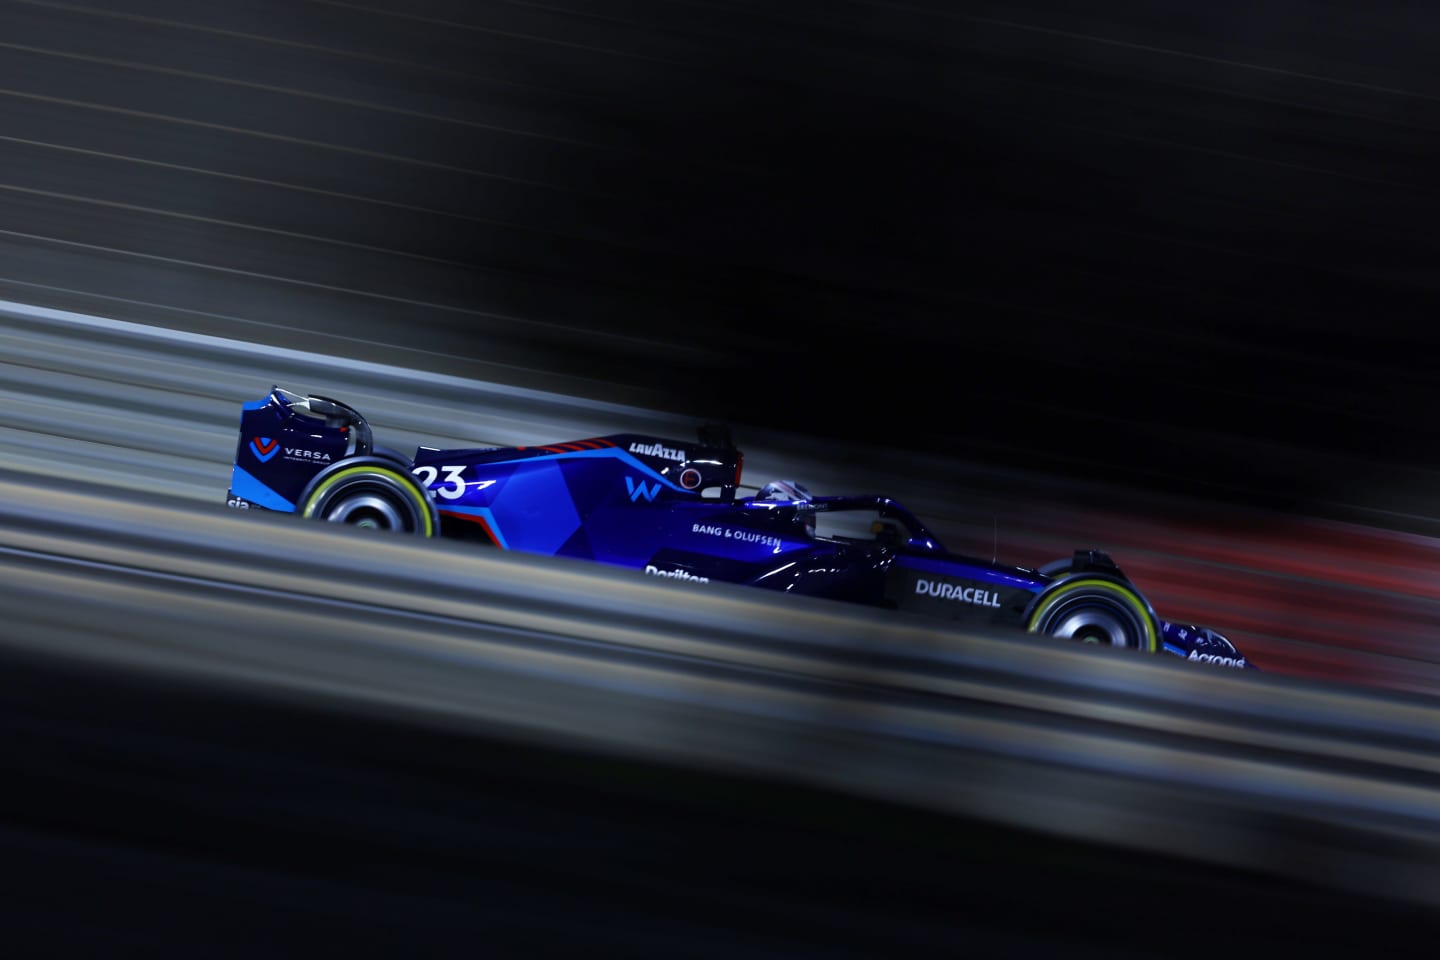 BAHRAIN, BAHRAIN - MARCH 18: Alexander Albon of Thailand driving the (23) Williams FW44 Mercedes on track during practice ahead of the F1 Grand Prix of Bahrain at Bahrain International Circuit on March 18, 2022 in Bahrain, Bahrain. (Photo by Lars Baron/Getty Images)